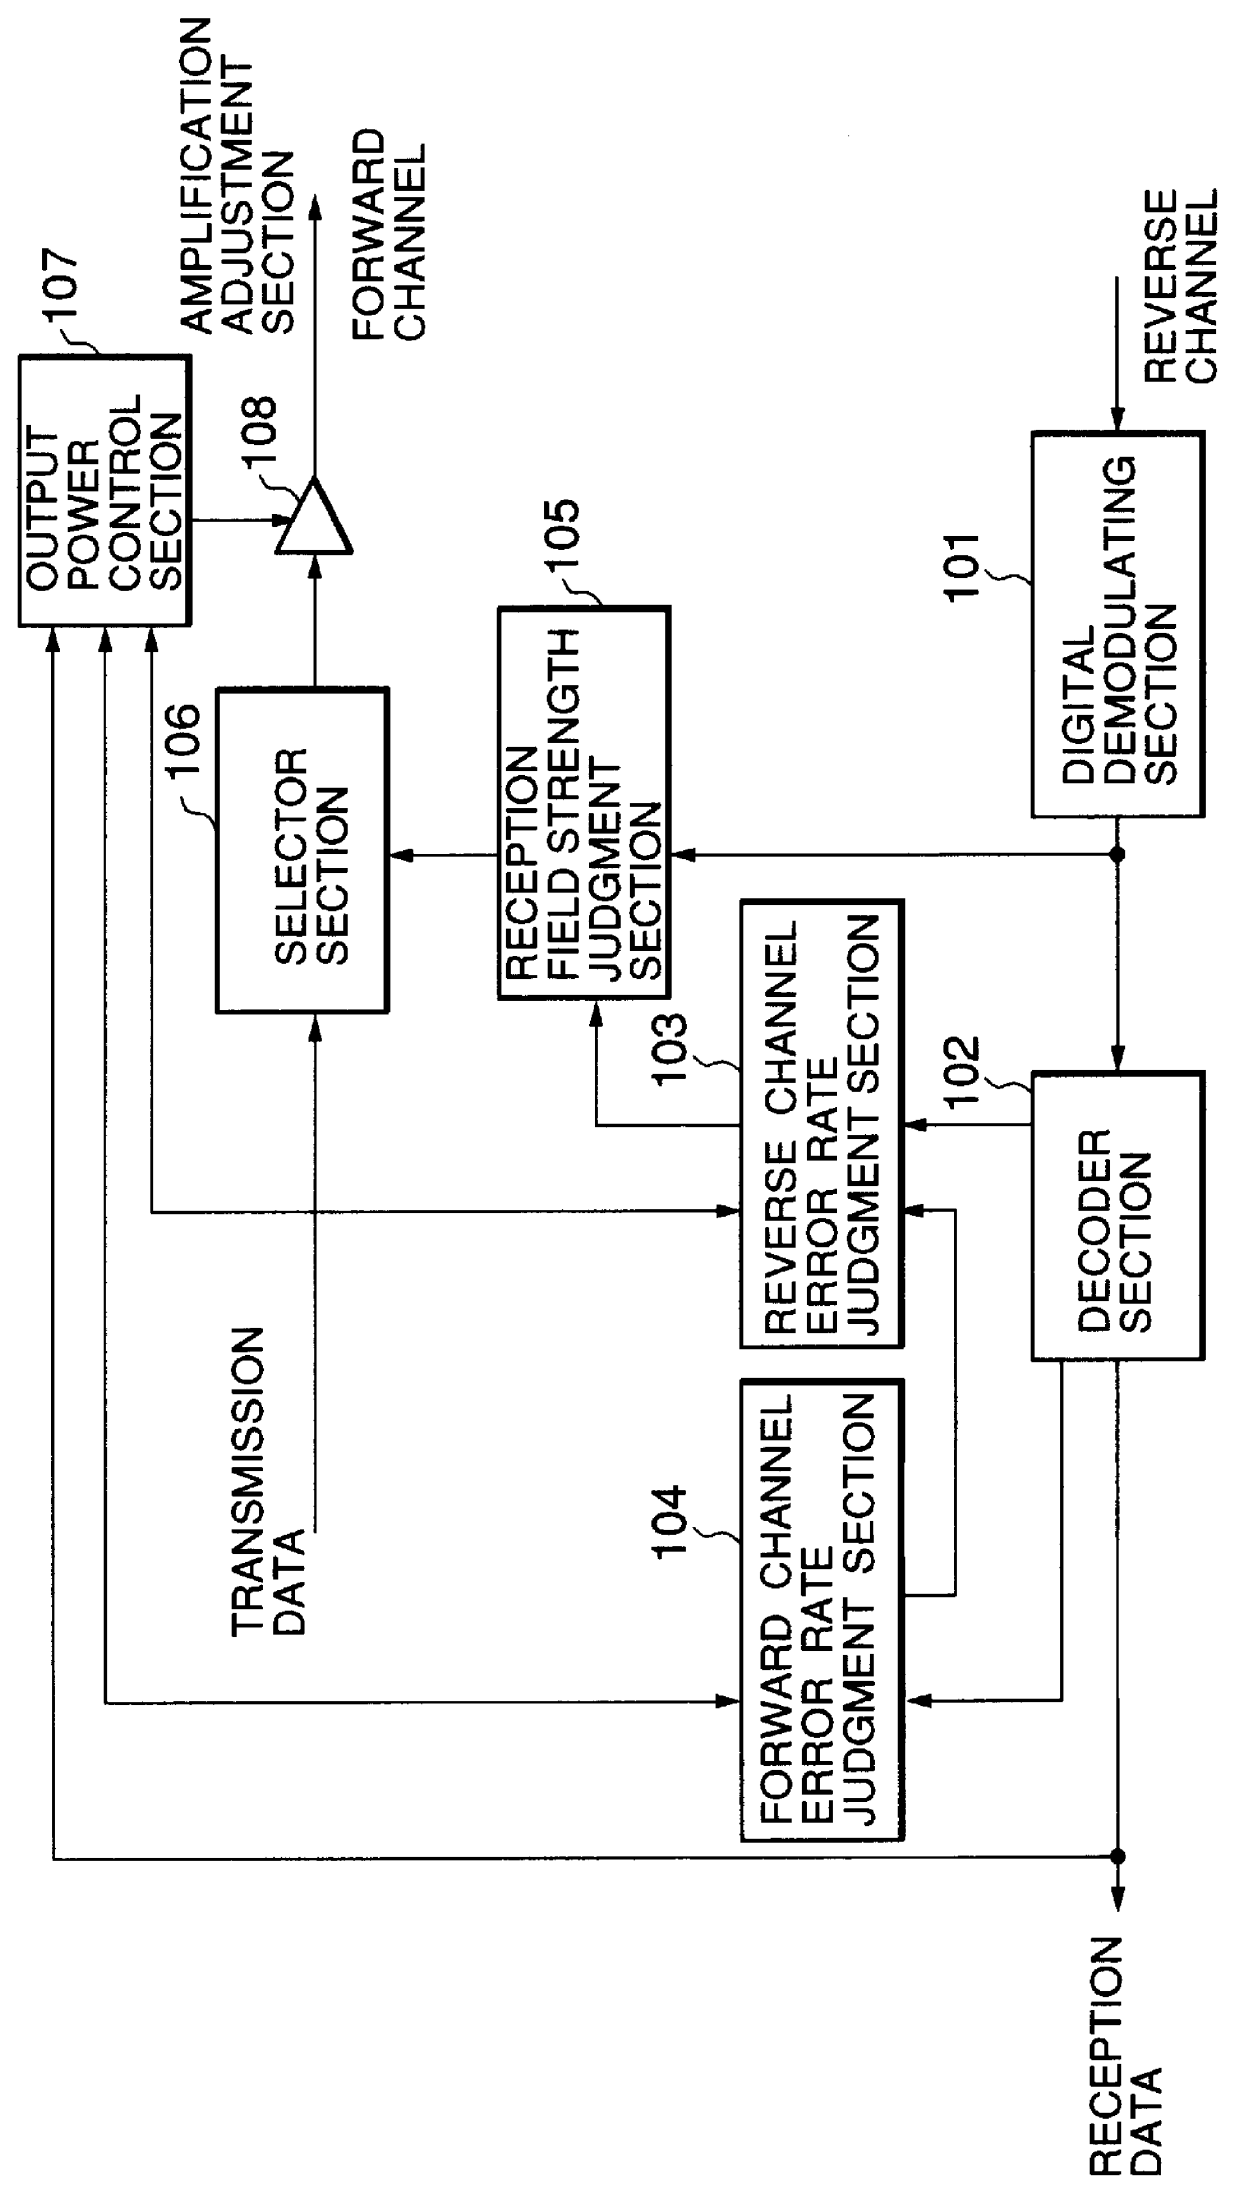 Transmission power control apparatus for a mobile communication system